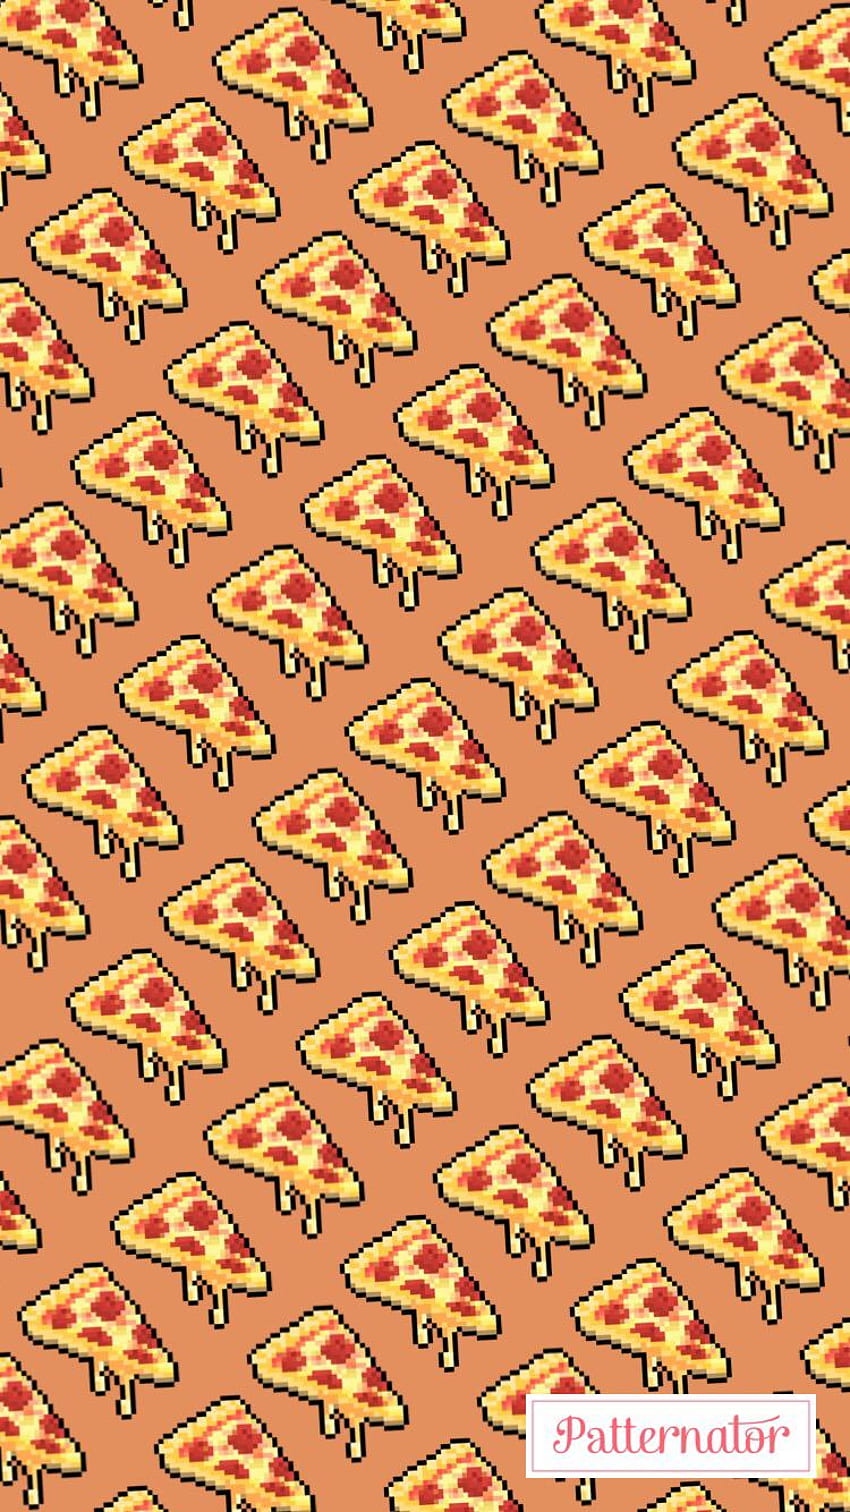 A pattern of pizza slices in a repeating pattern on a brown background - Pizza